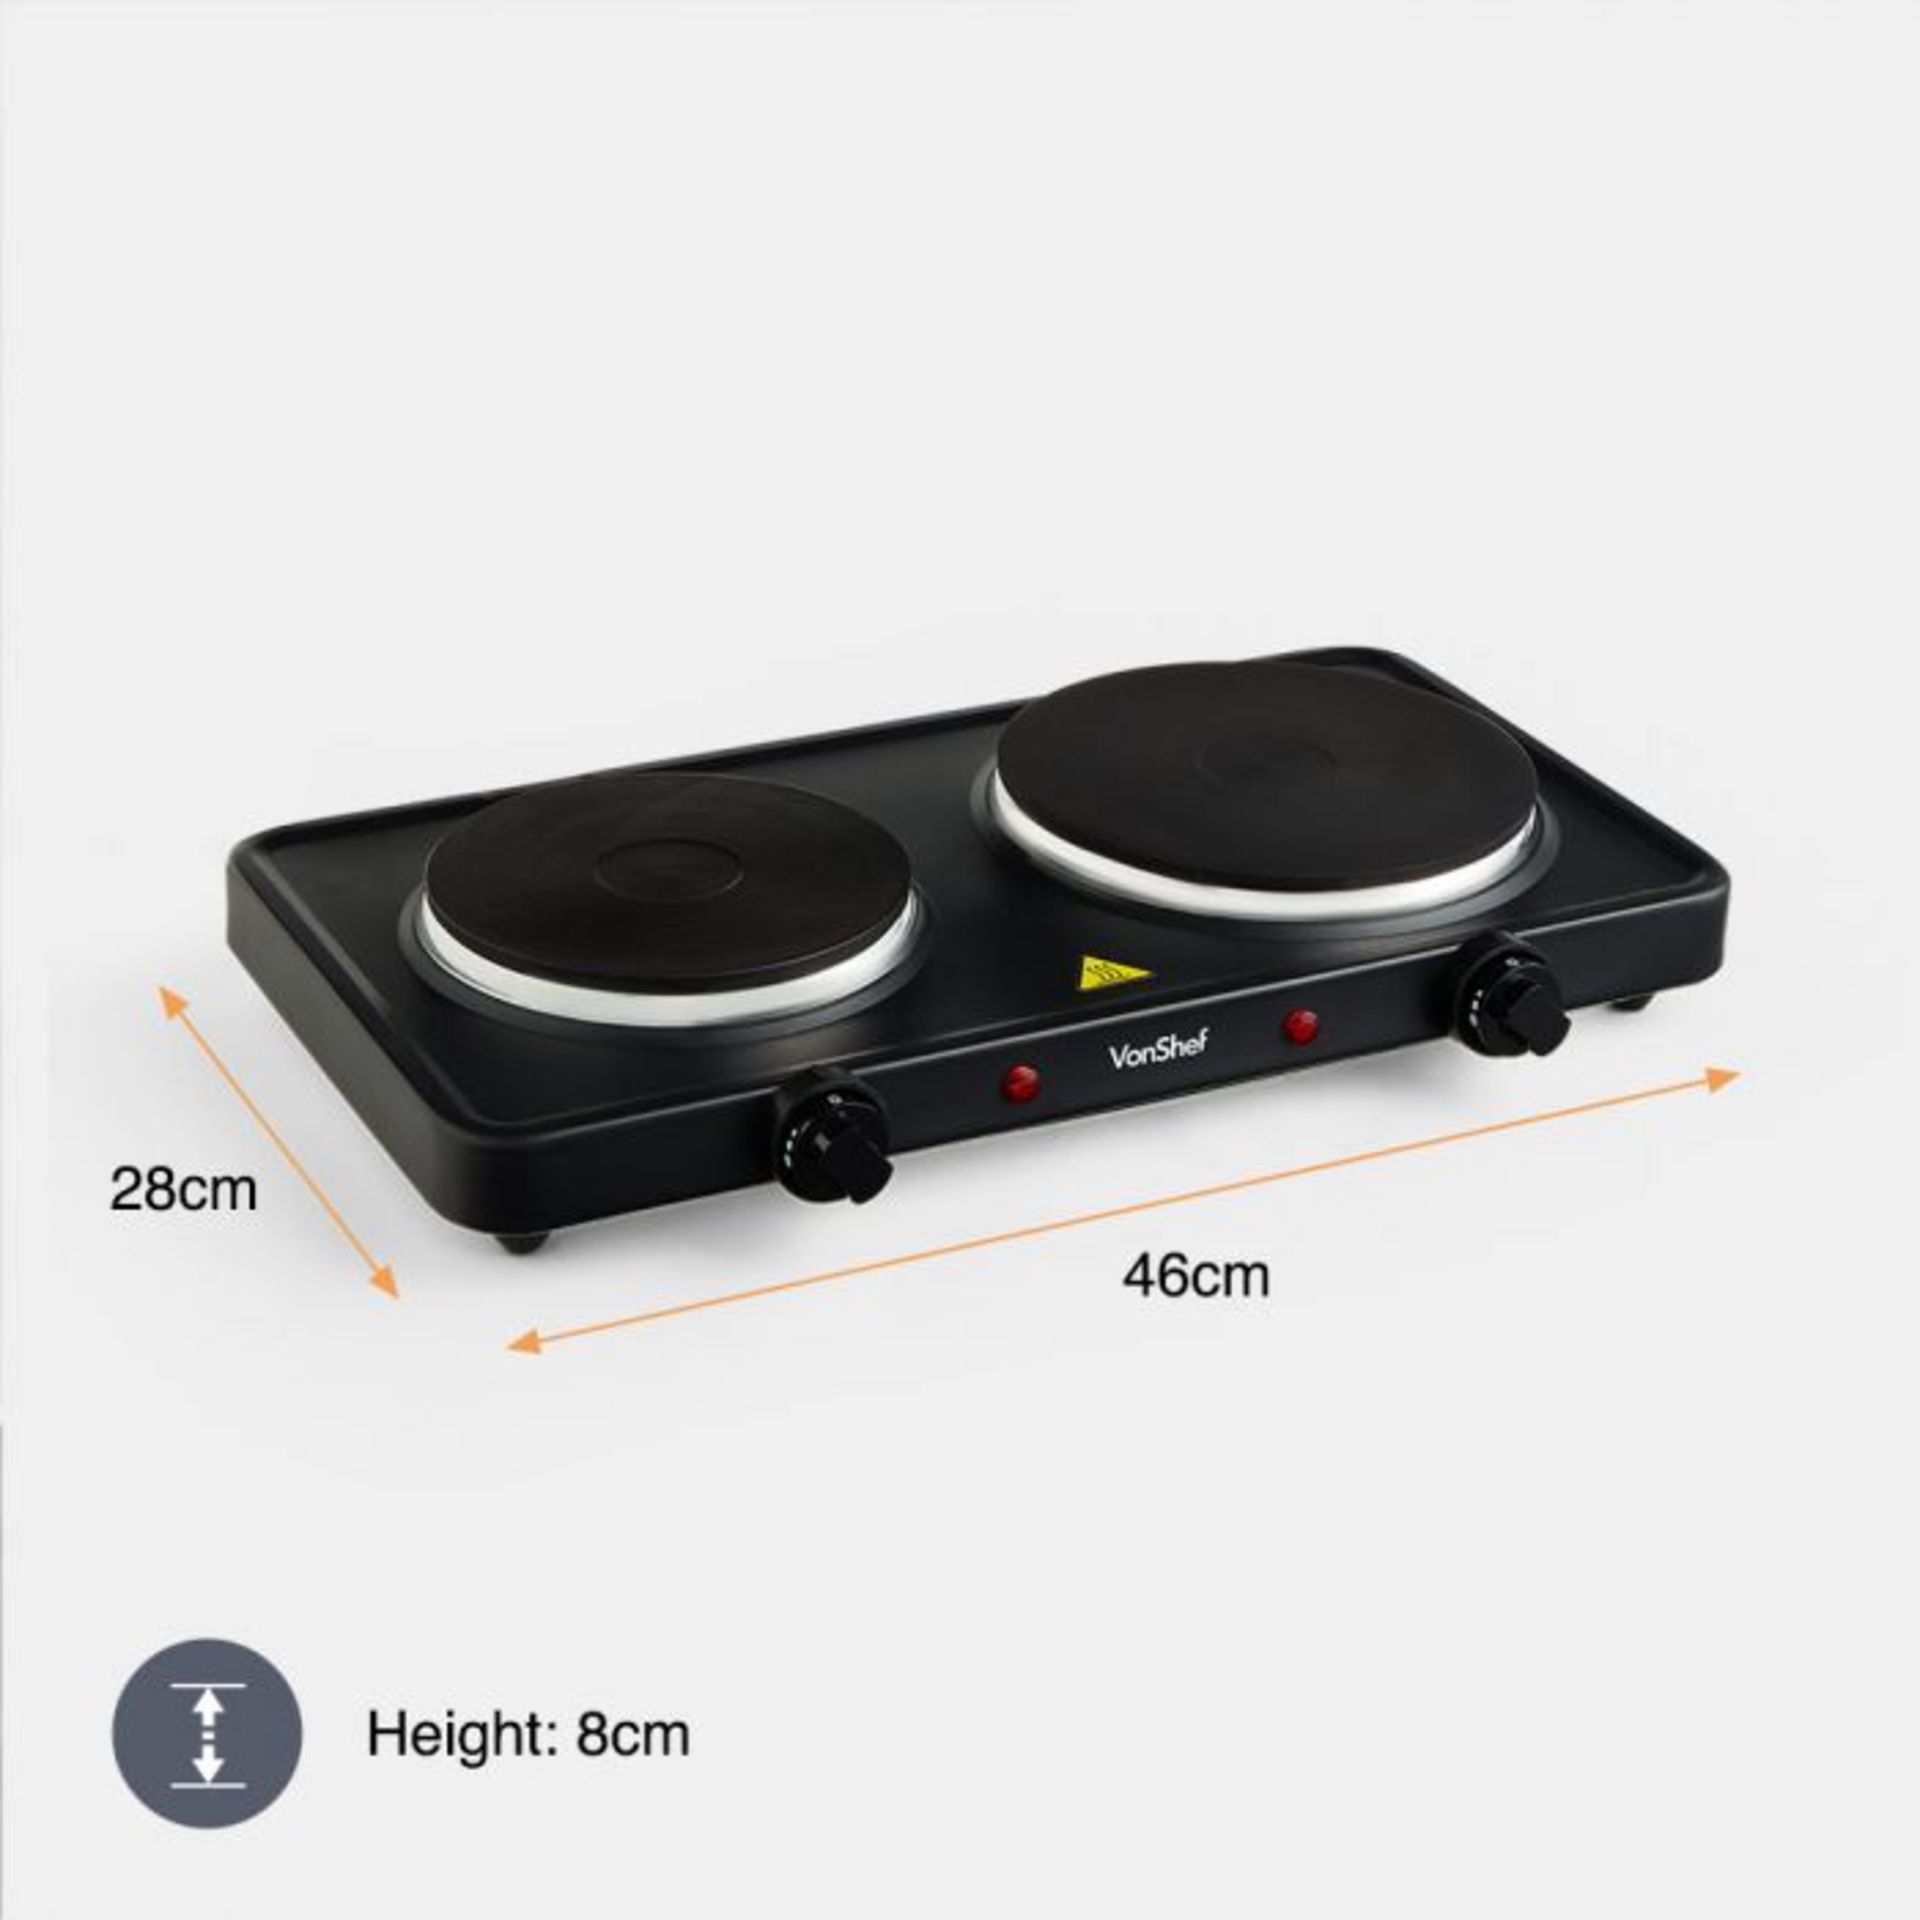 (V91) Double Hot Plate Small, lightweight and easily portable, use the hot plate for cooking i... - Image 4 of 4